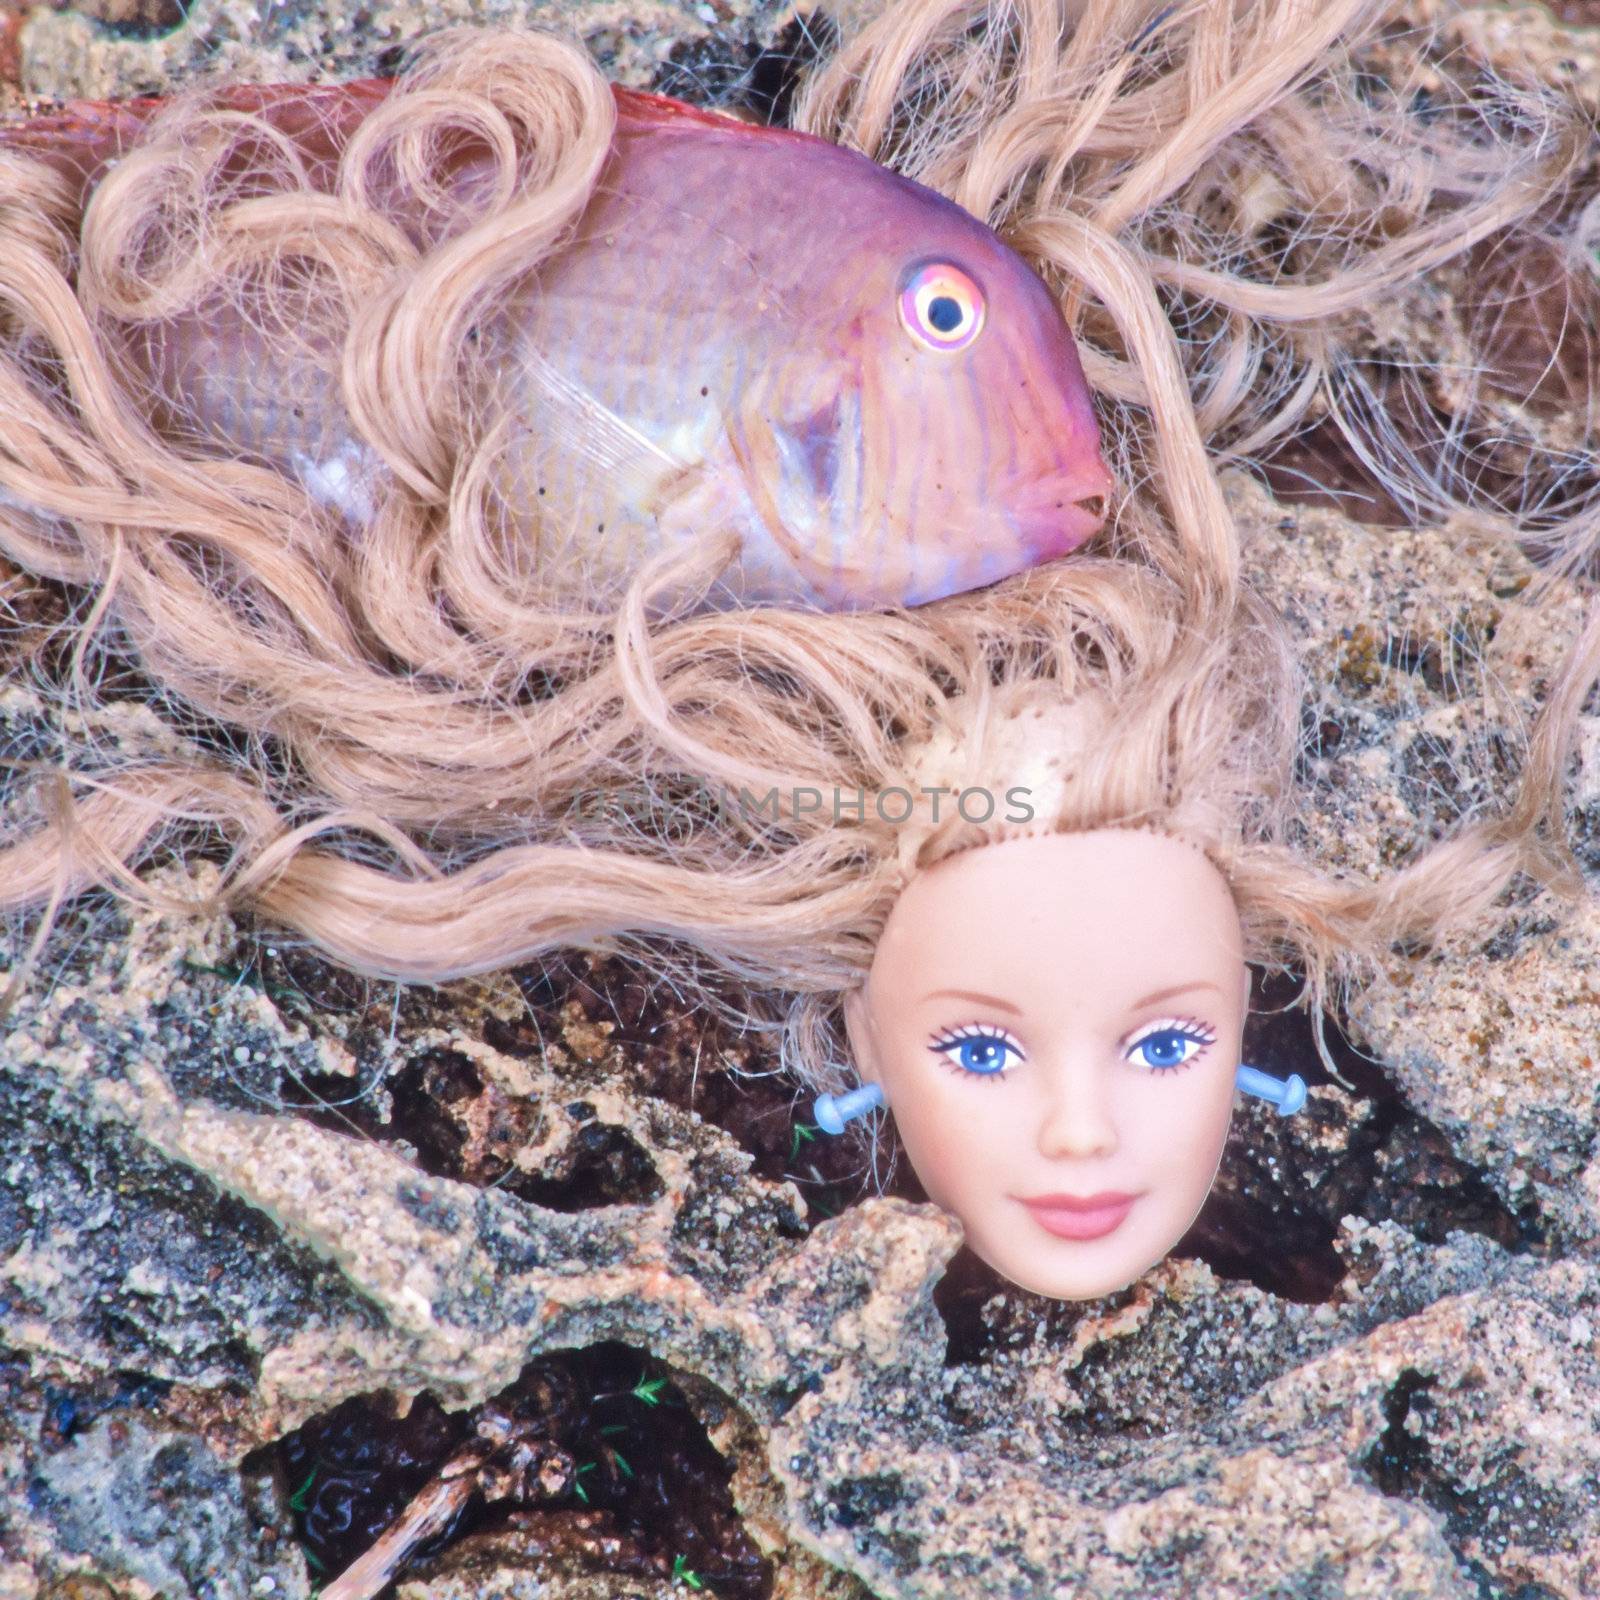 Nightmare concept: Blond doll head flotsam washed on rocky shore with slimy red fish in her hair.